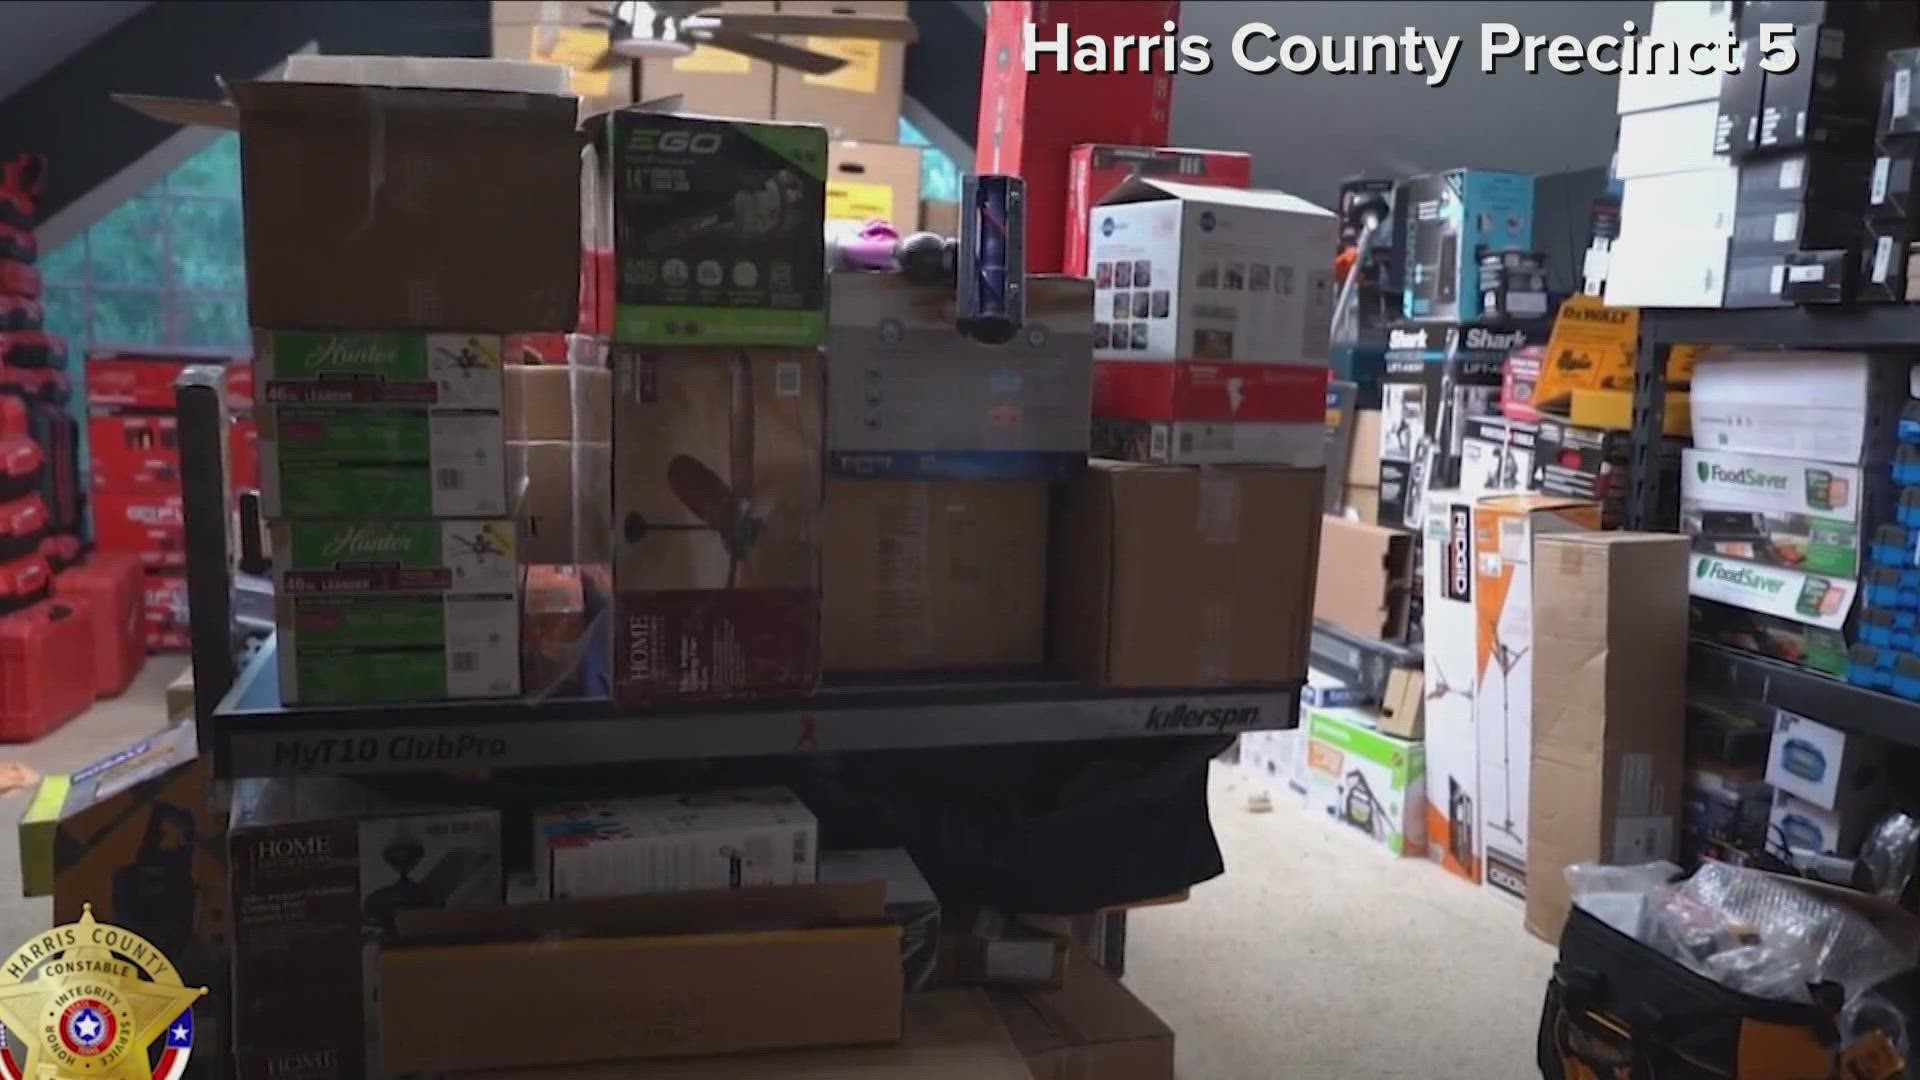 One home near Katy was stacked floor to ceiling with more than $1M worth of merchandise from Home Depot and even had an elevator lift to move the heavy stuff.